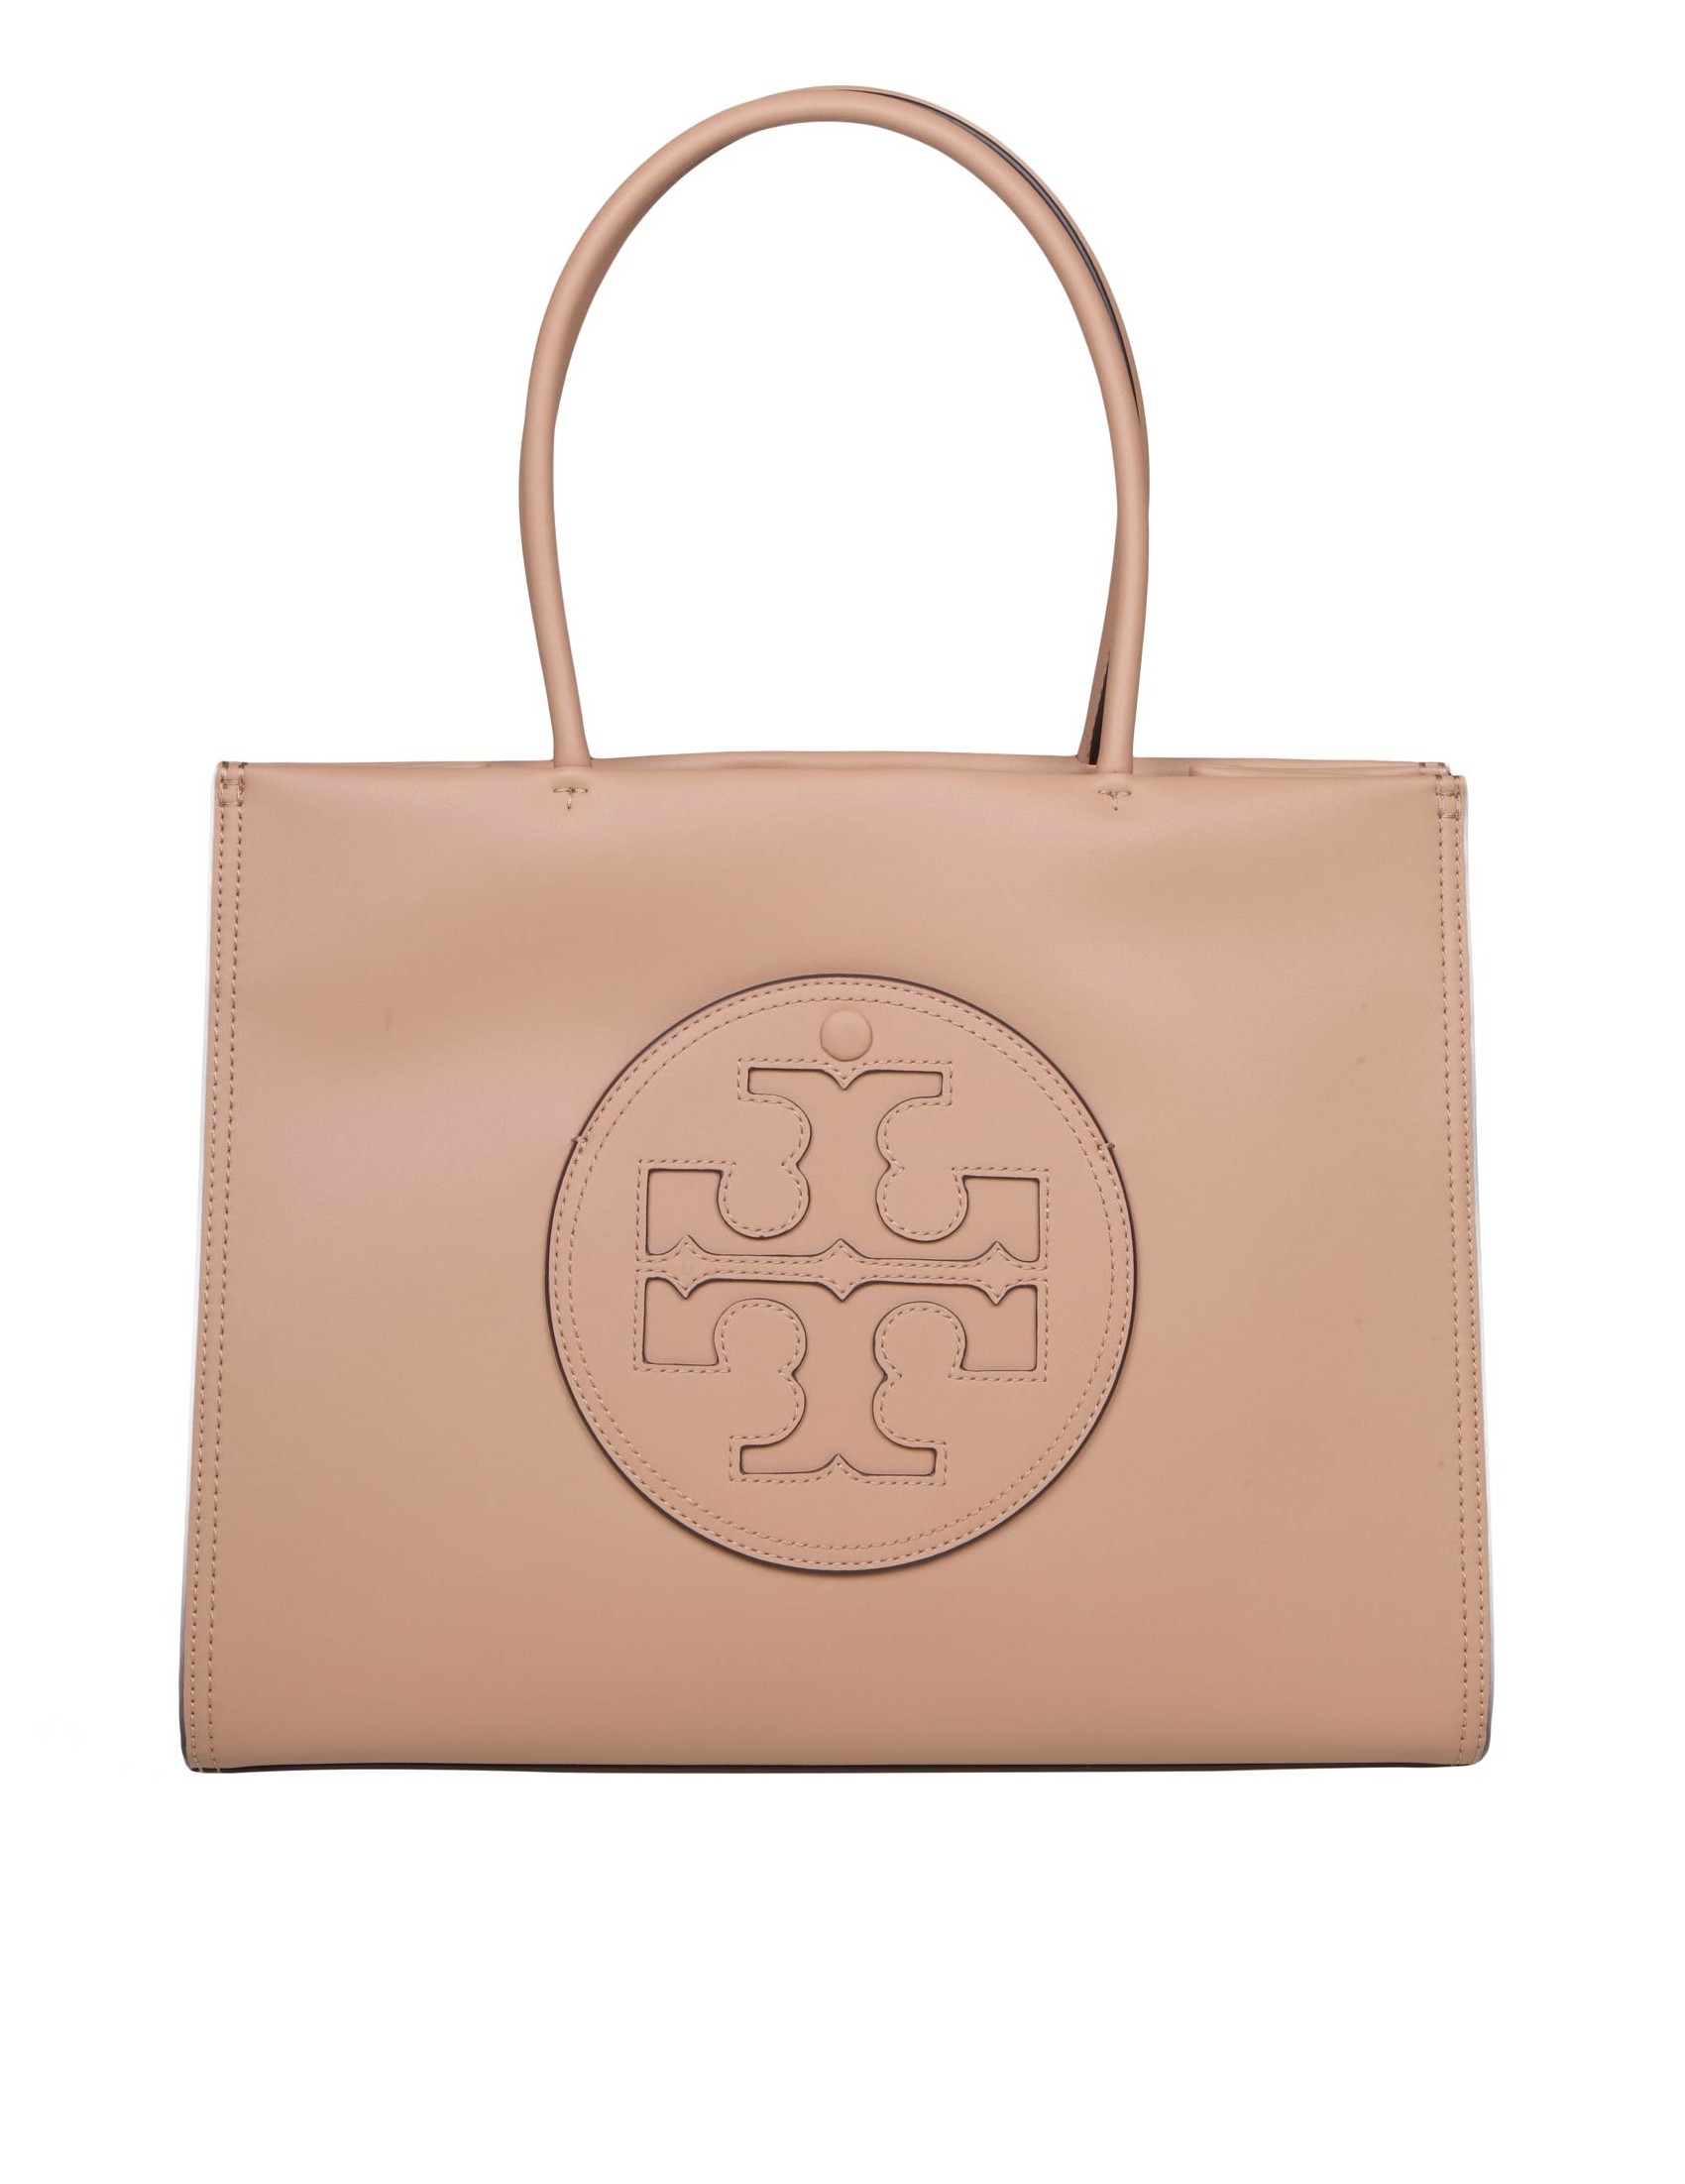 TORY BURCH SMALL ECO ELLA SHOPPING BAG COLOR LEATHER